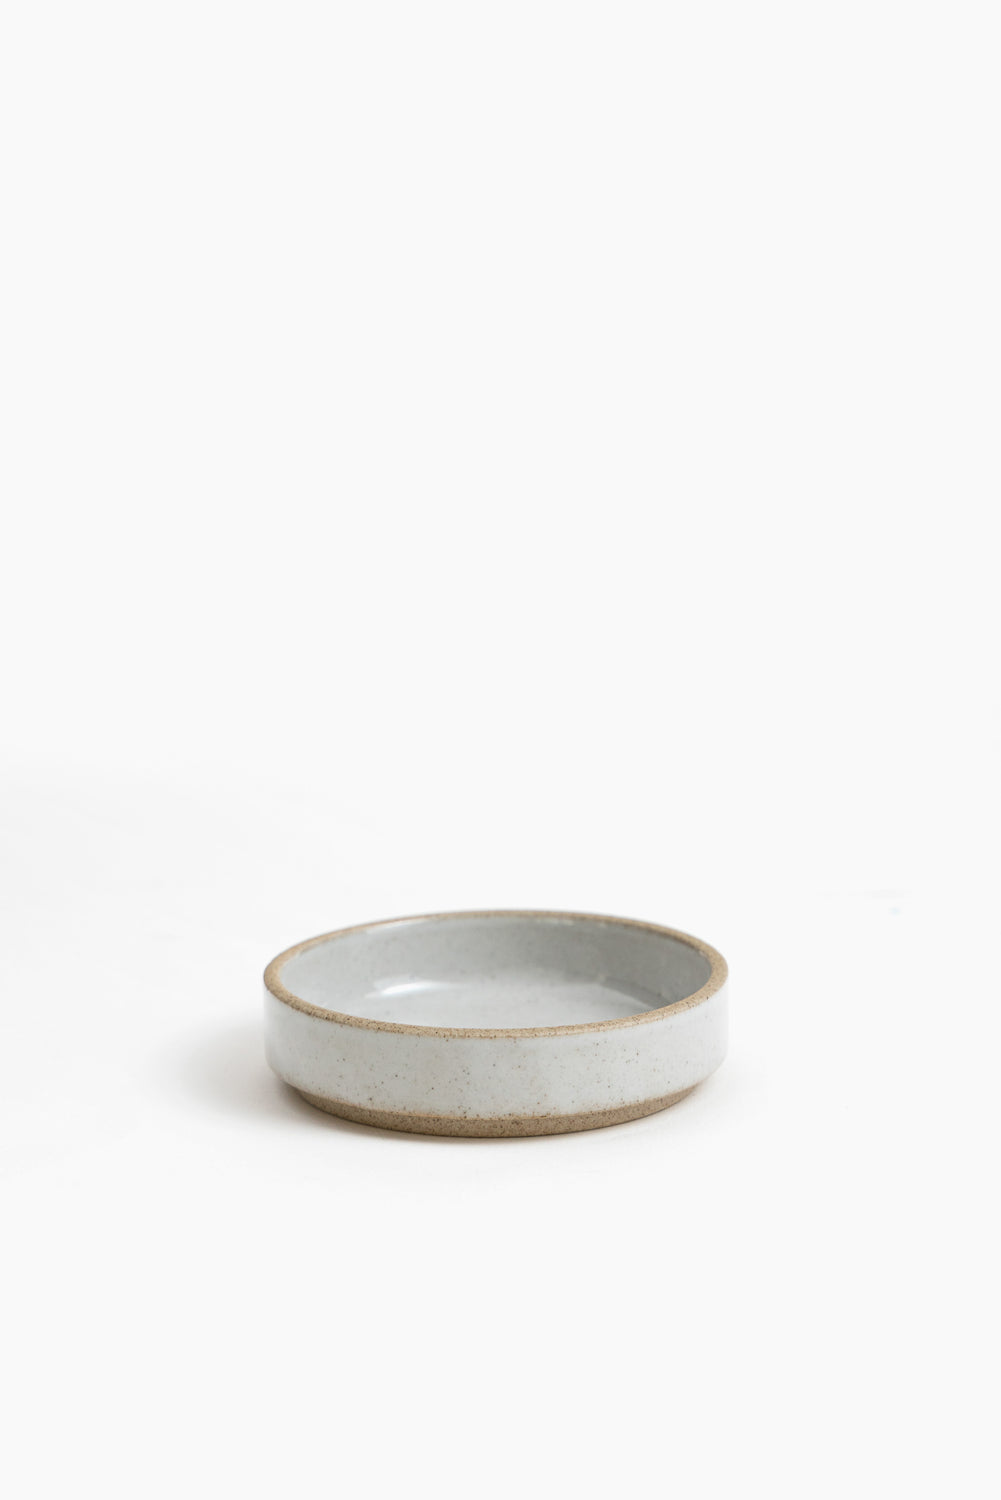 Small Porcelain Plate, Gloss Grey